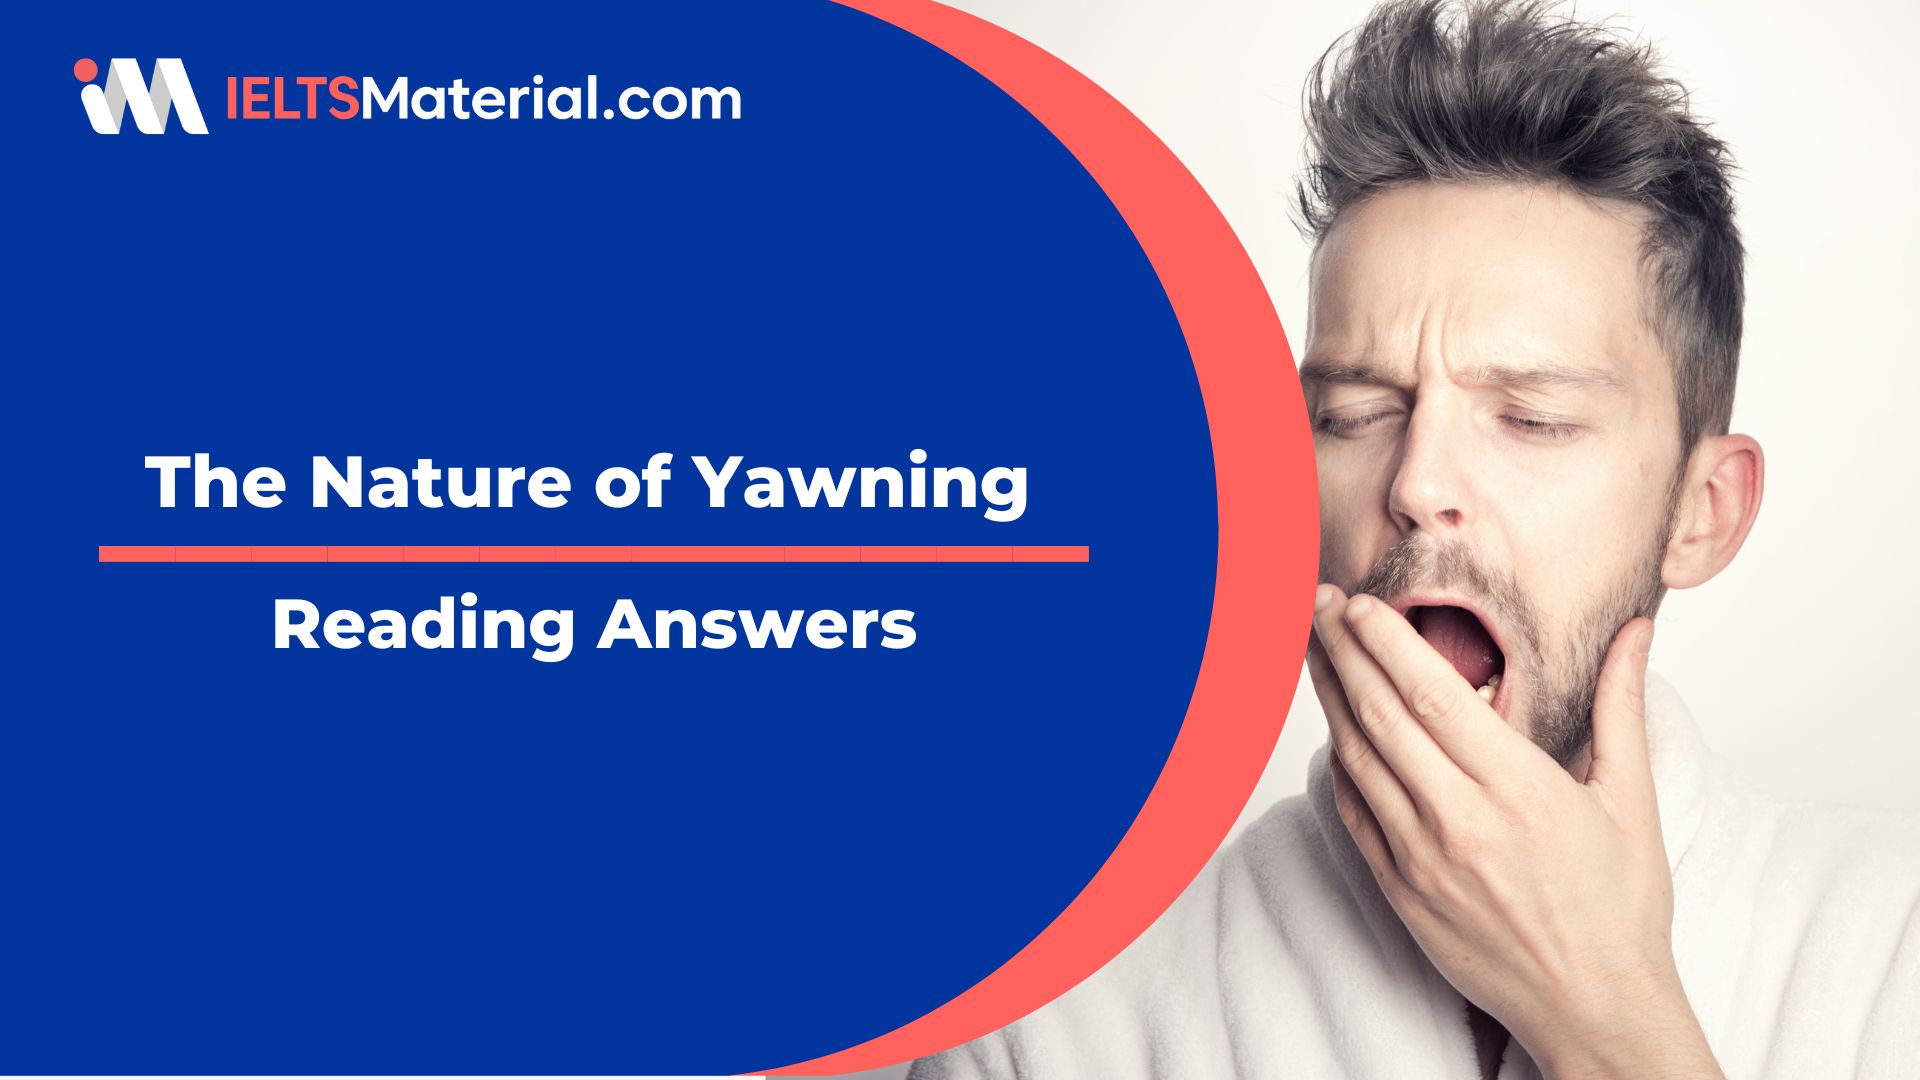 The Nature of Yawning Reading Answers